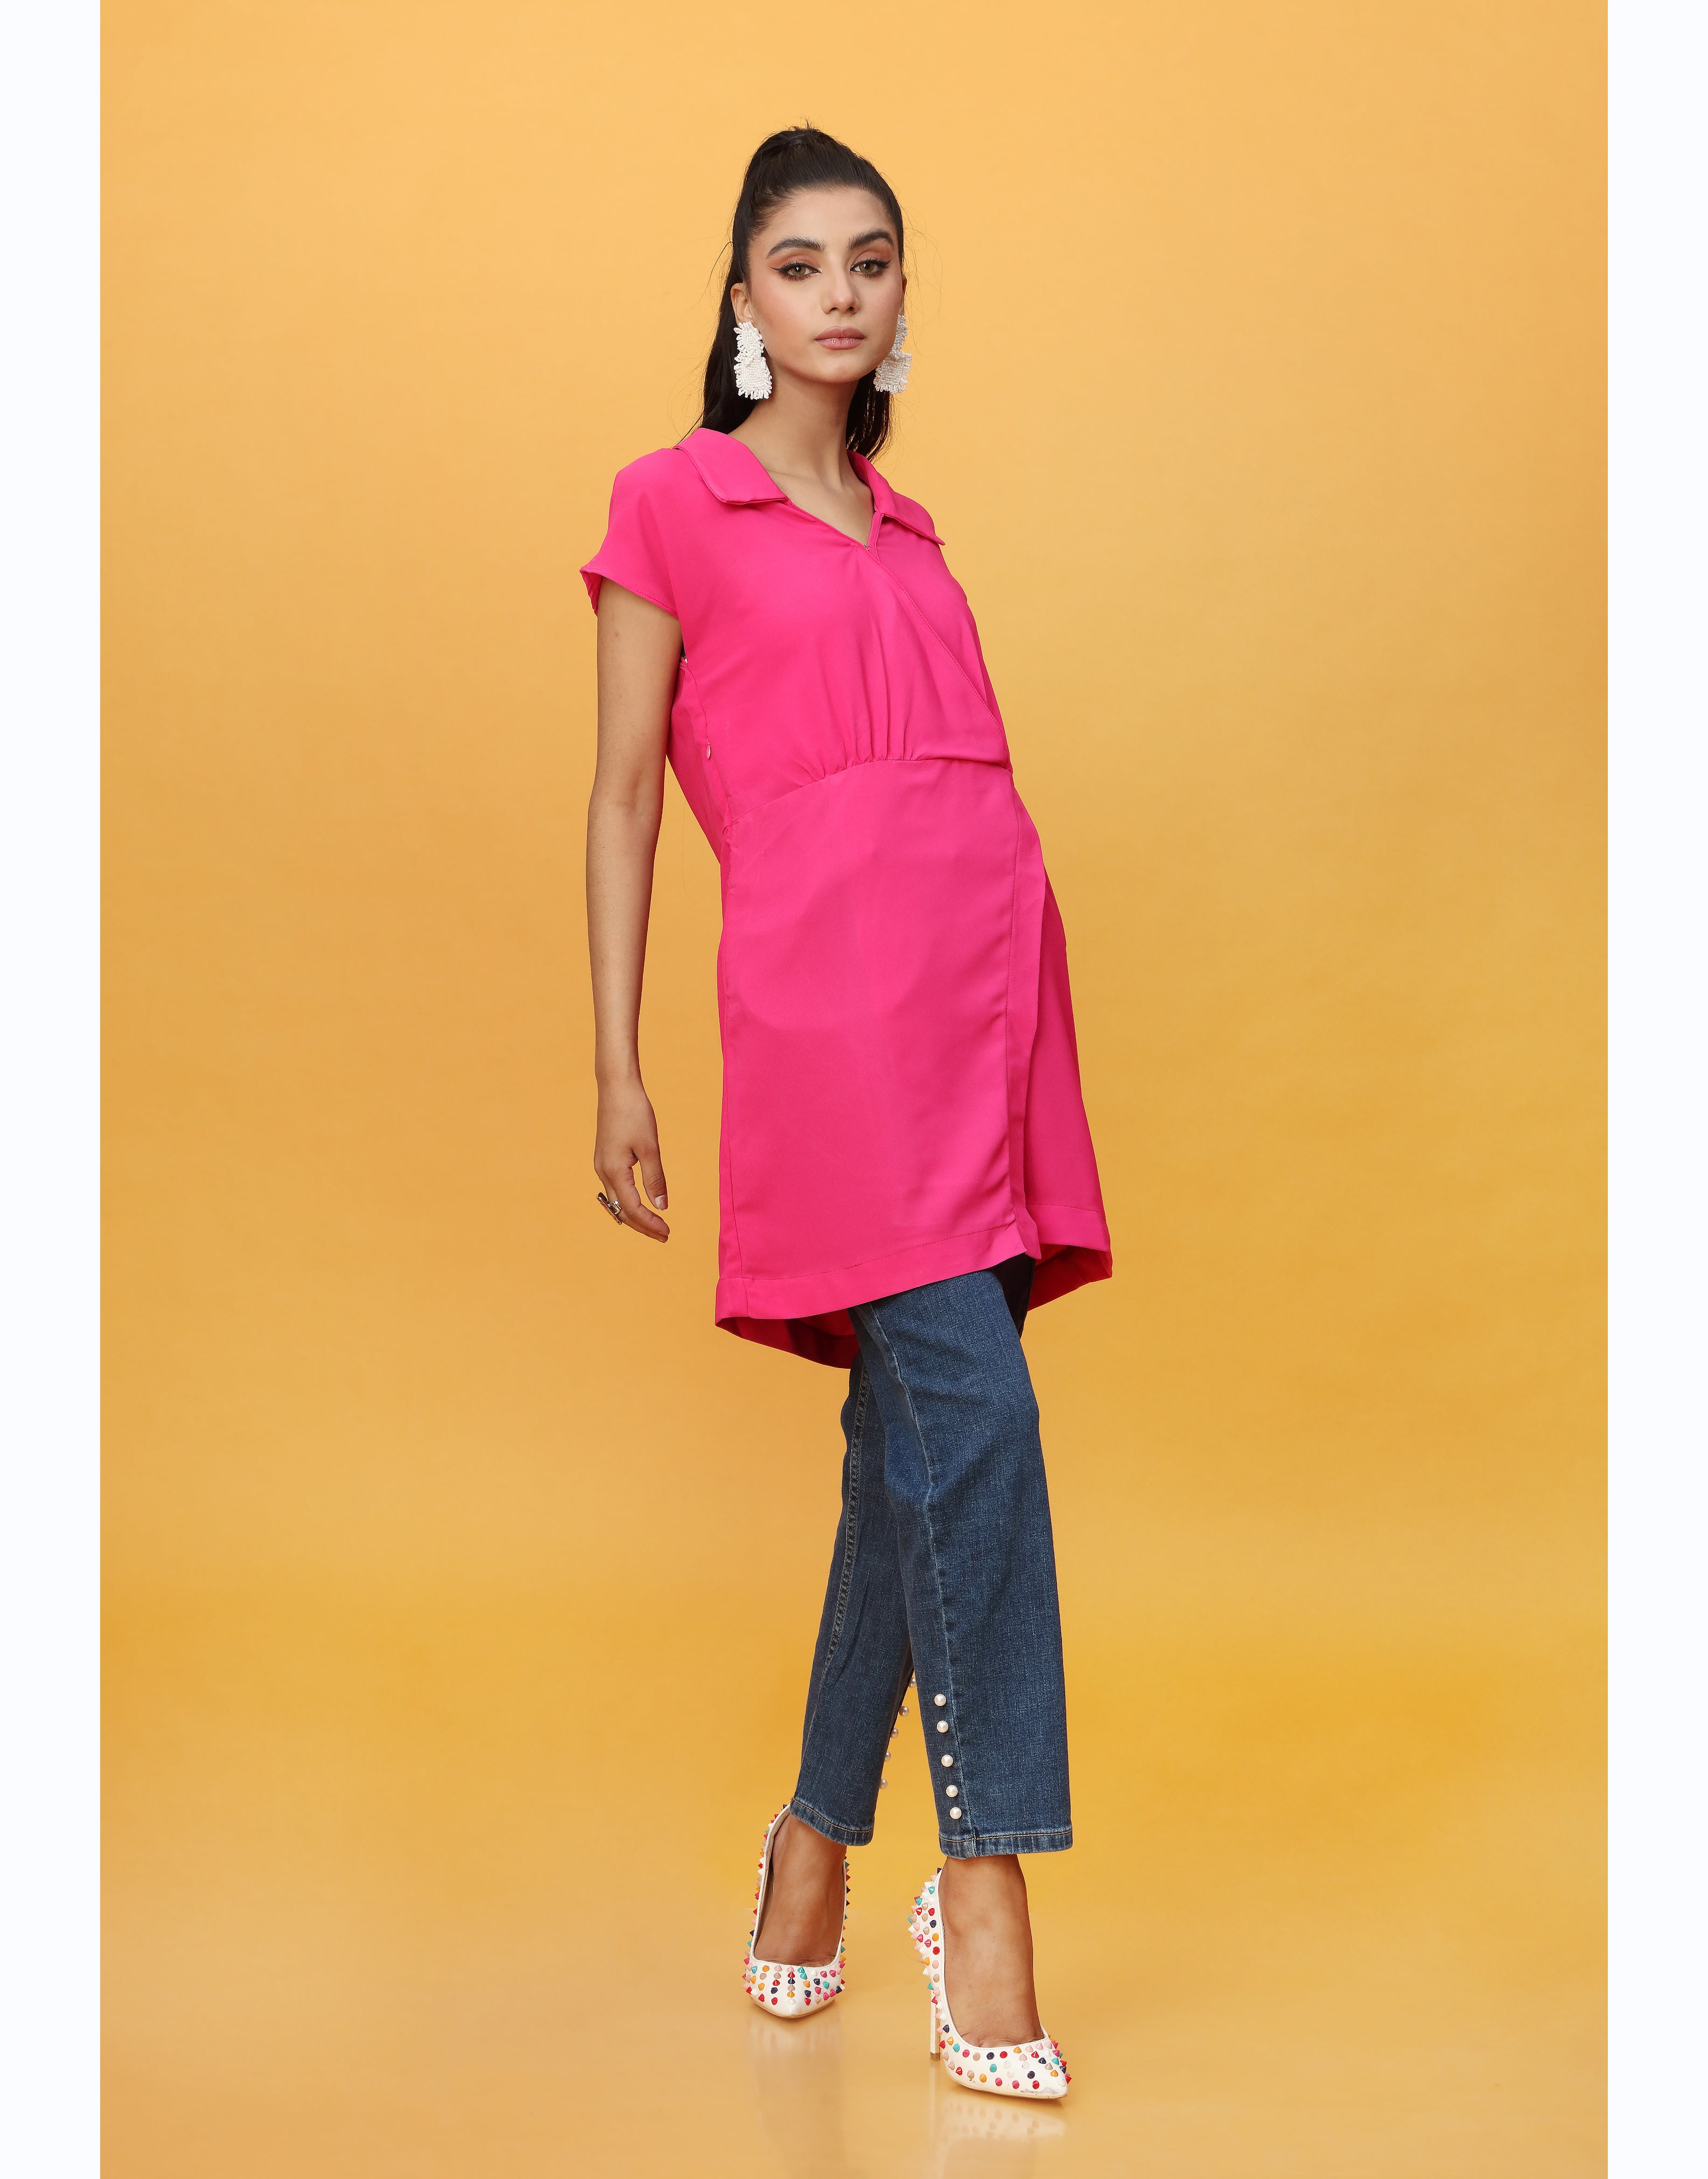 Collar Neck Long Top in Hot Pink